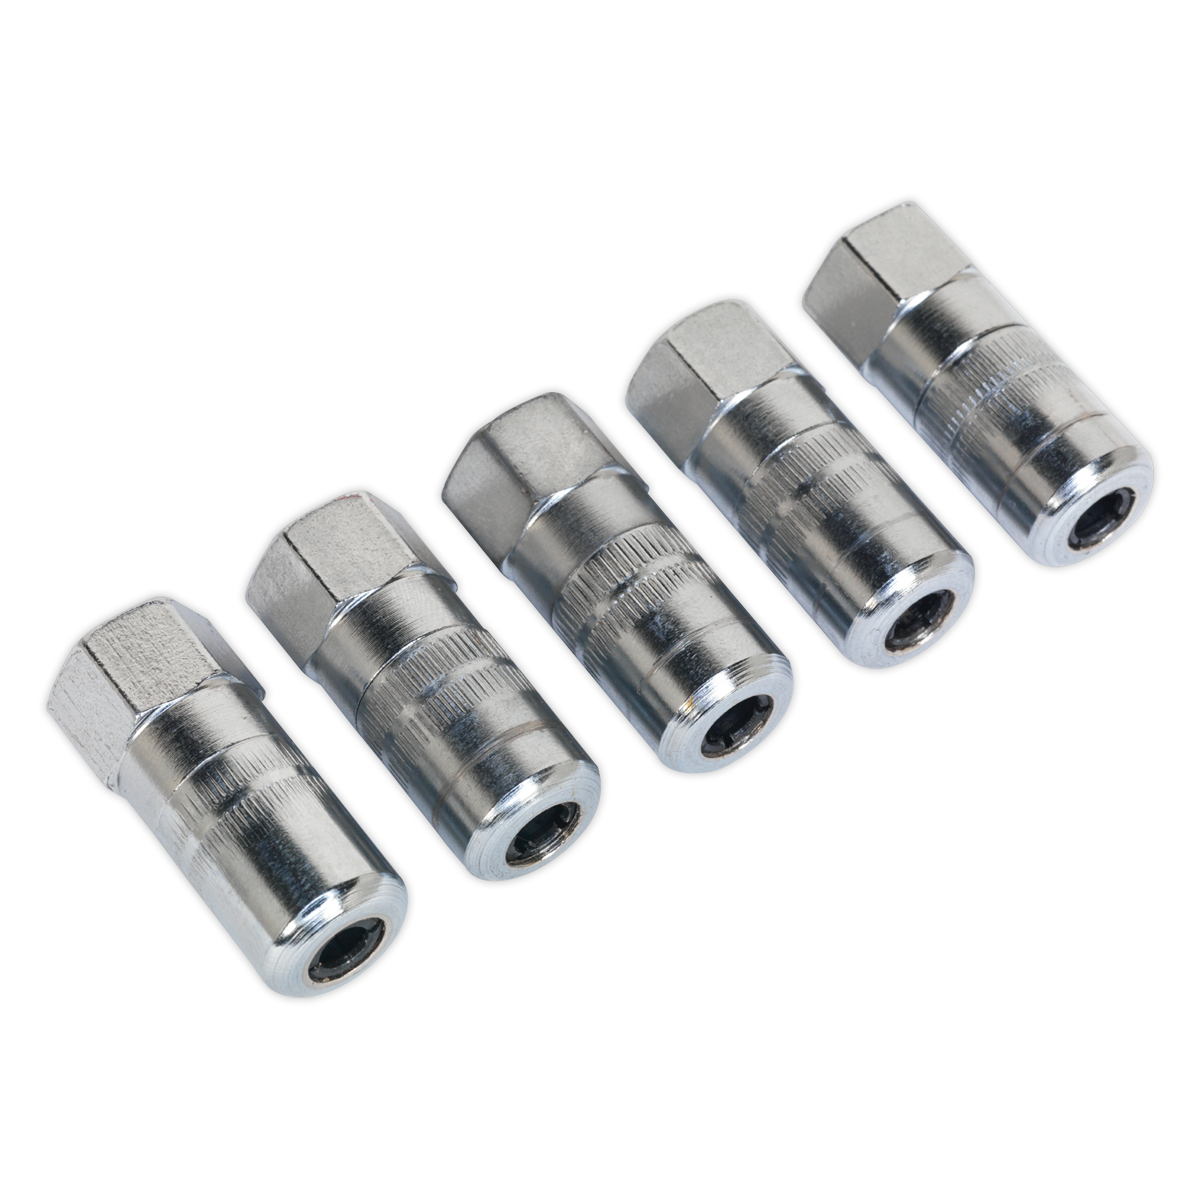 Sealey Hydraulic Connector 4-Jaw Heavy-Duty 1/8"BSP Pack of 5